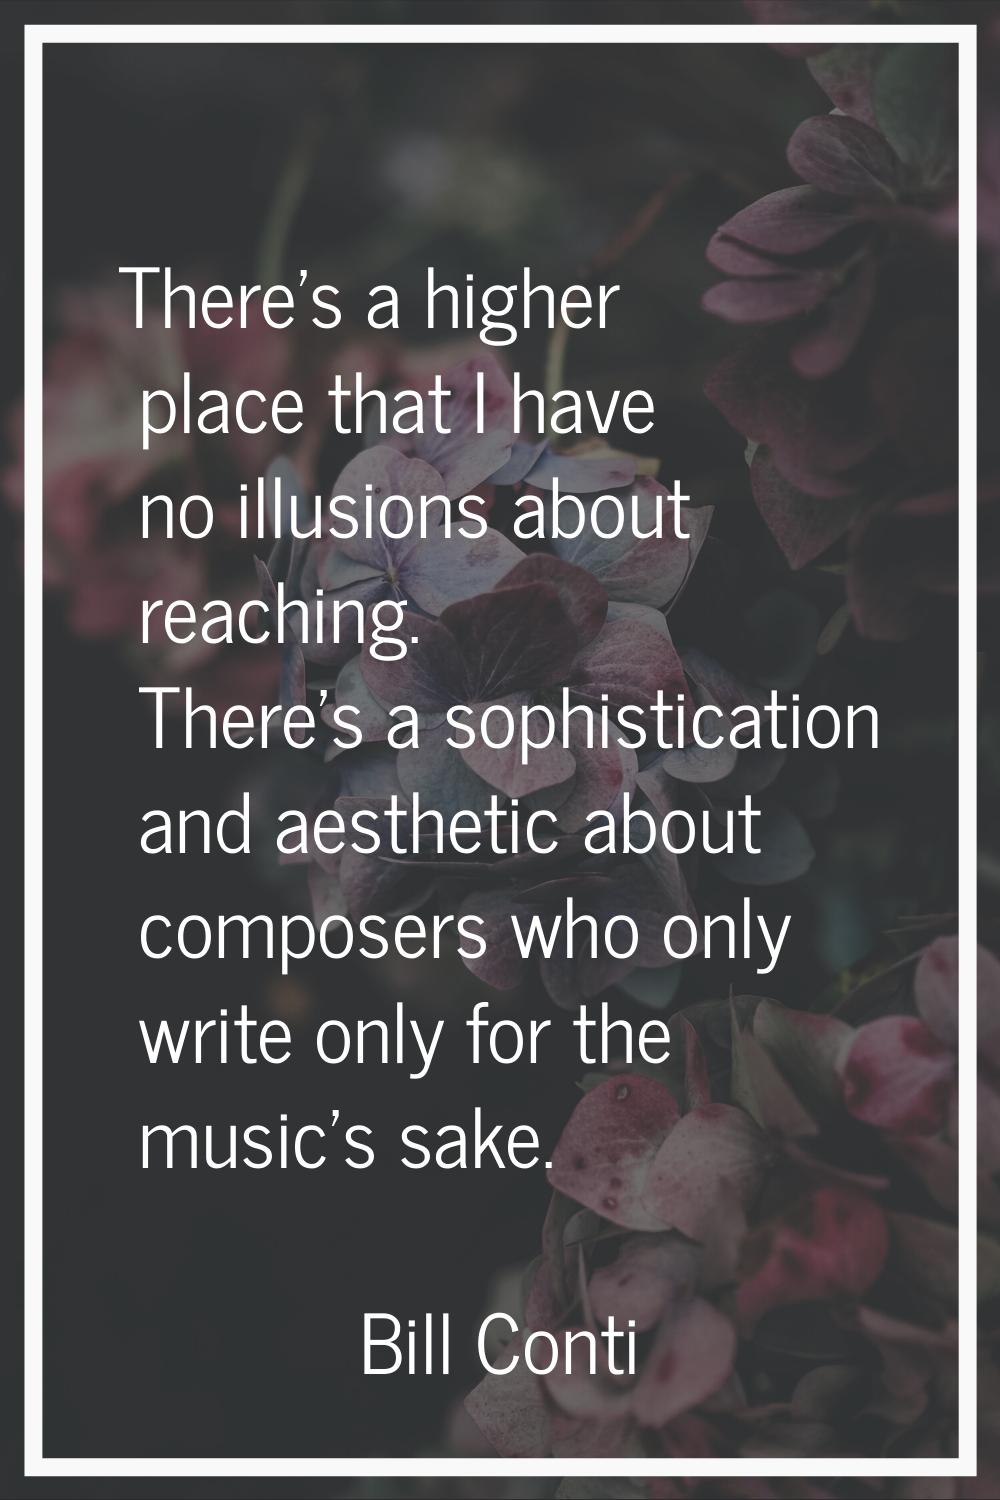 There's a higher place that I have no illusions about reaching. There's a sophistication and aesthe